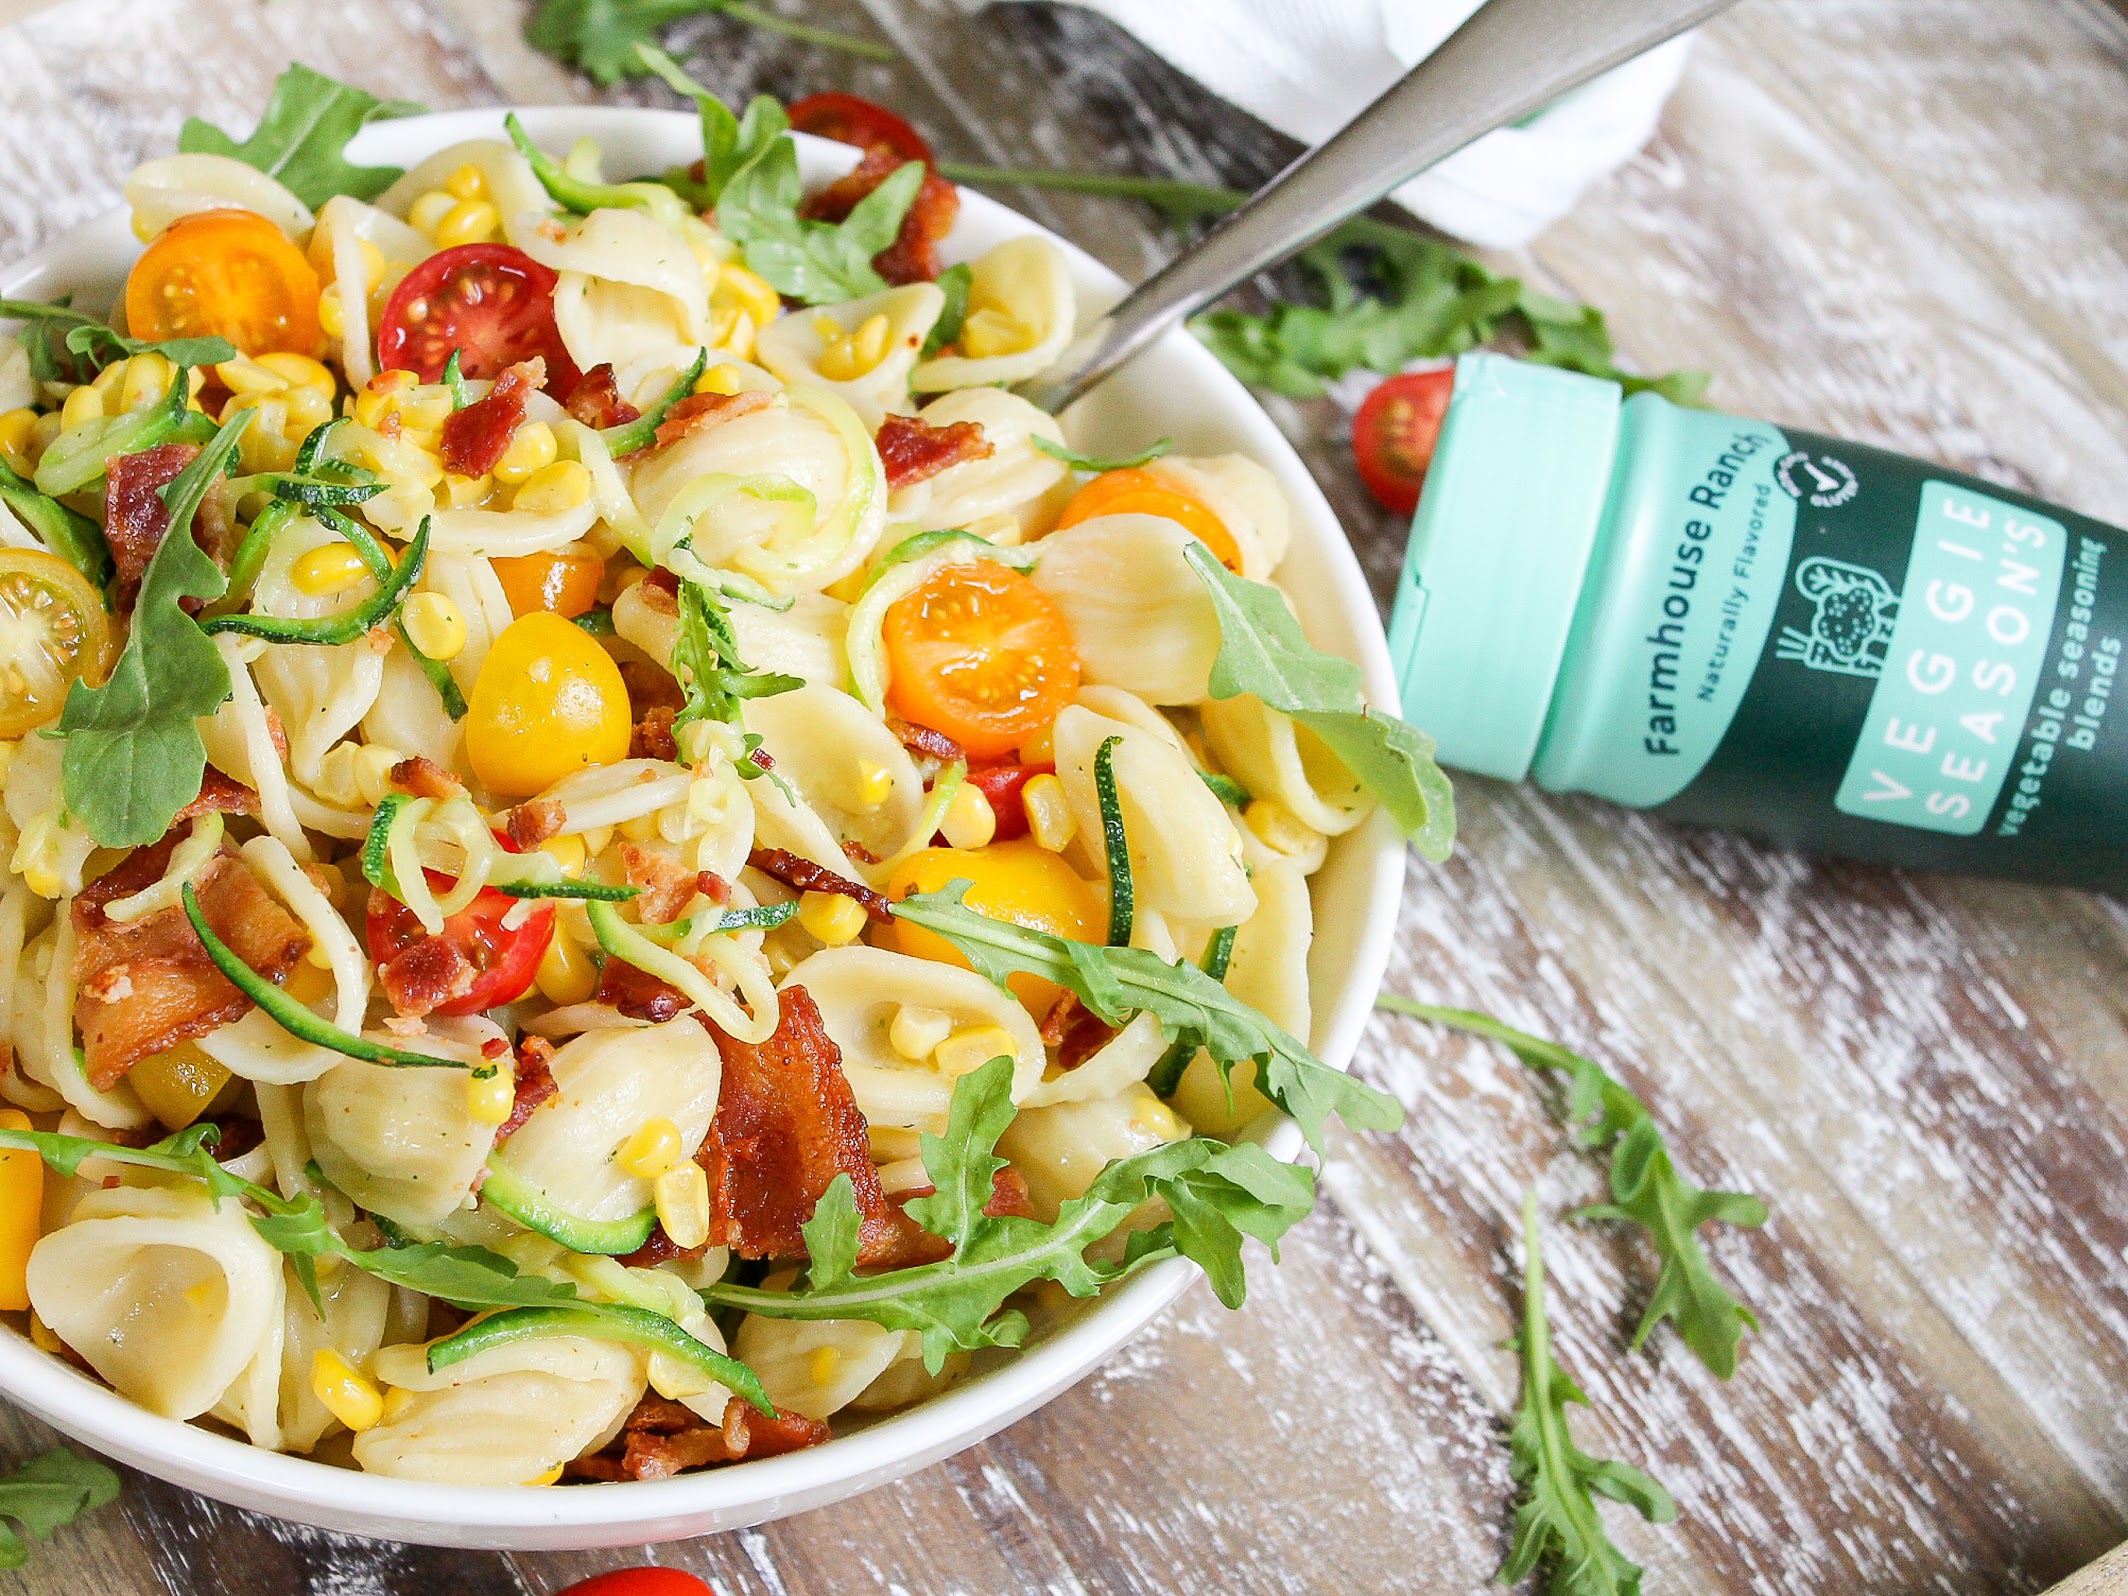 Make Mealtime Enjoyable With Veggie Season's - Try My Ranch Bacon Pasta Salad With Zucchini & Corn on I Heart Publix 4